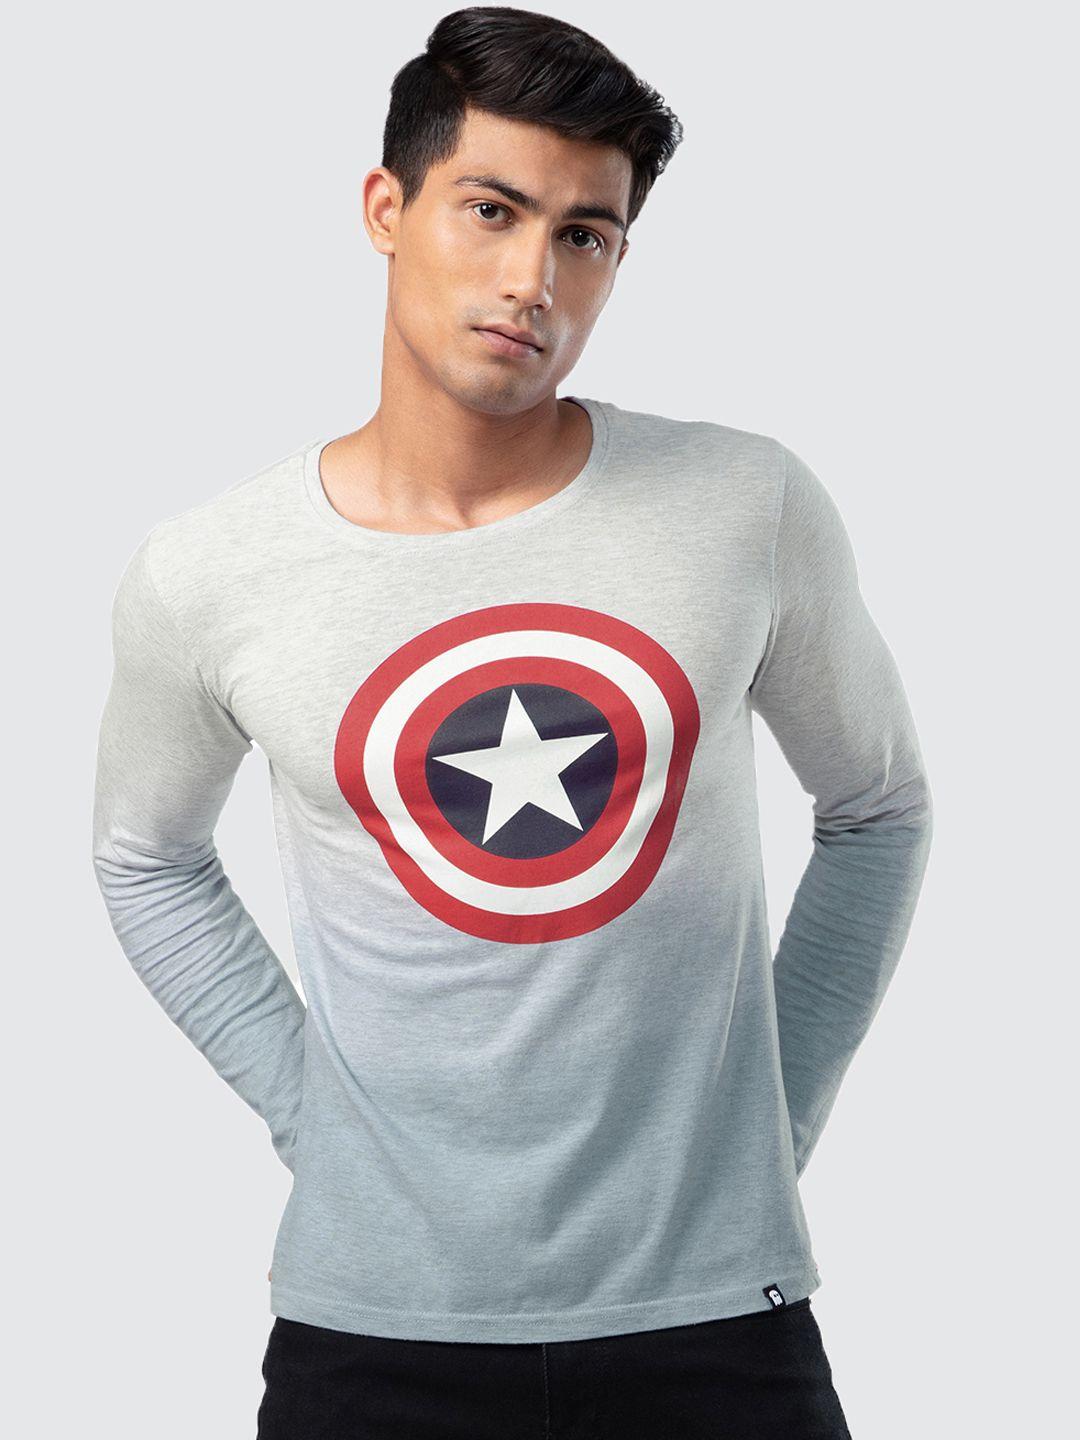 the souled store men grey melange & red captain america printed cotton t-shirt